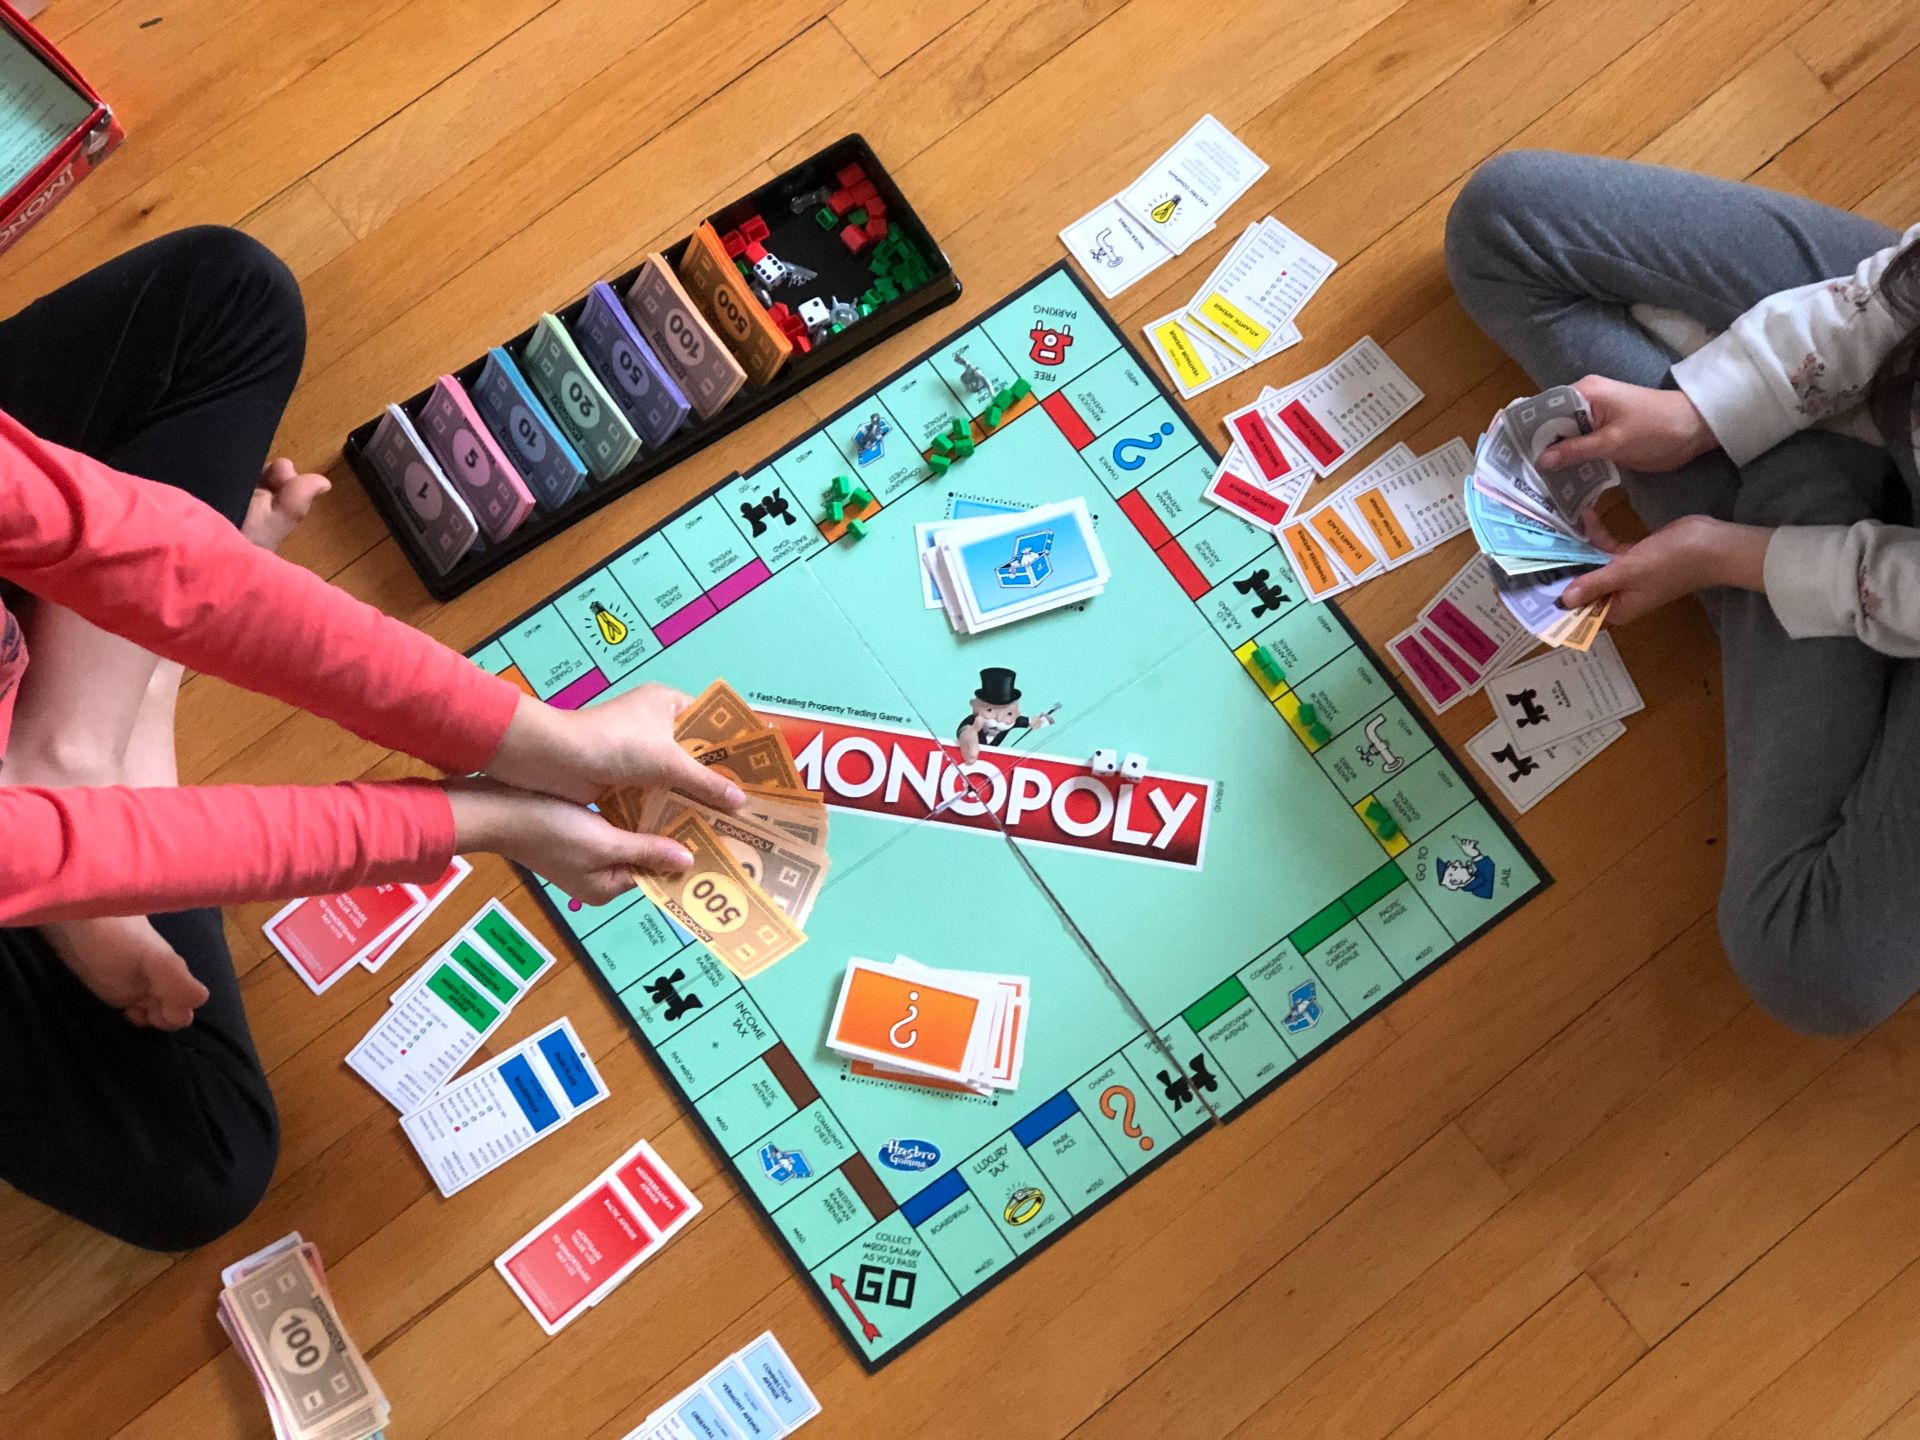 Monopoly Go Bows and Bandits